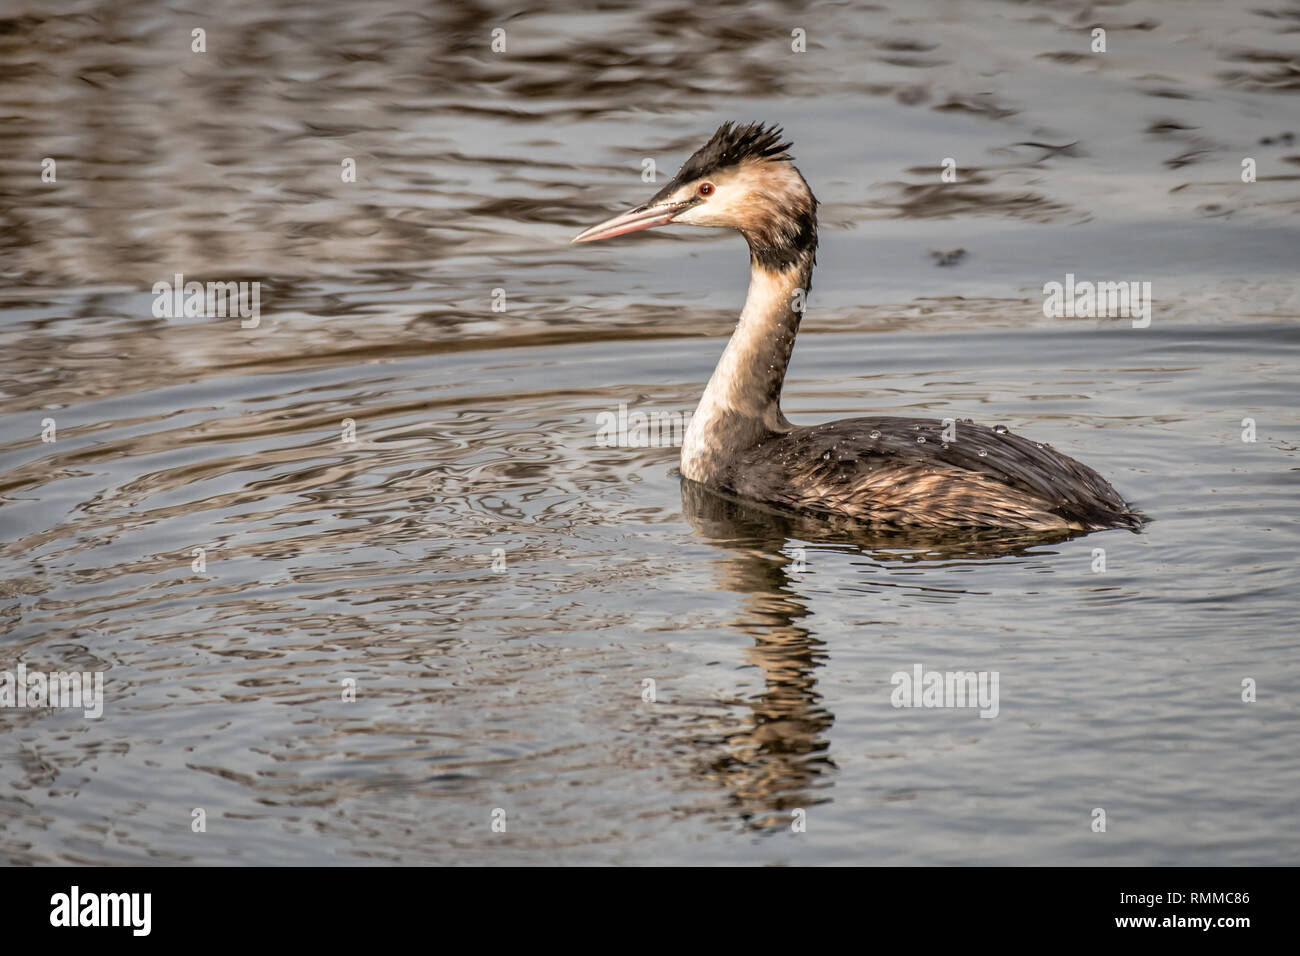 A grebe on a lake gently swimming and looking alert complete with reflection in the water Stock Photo